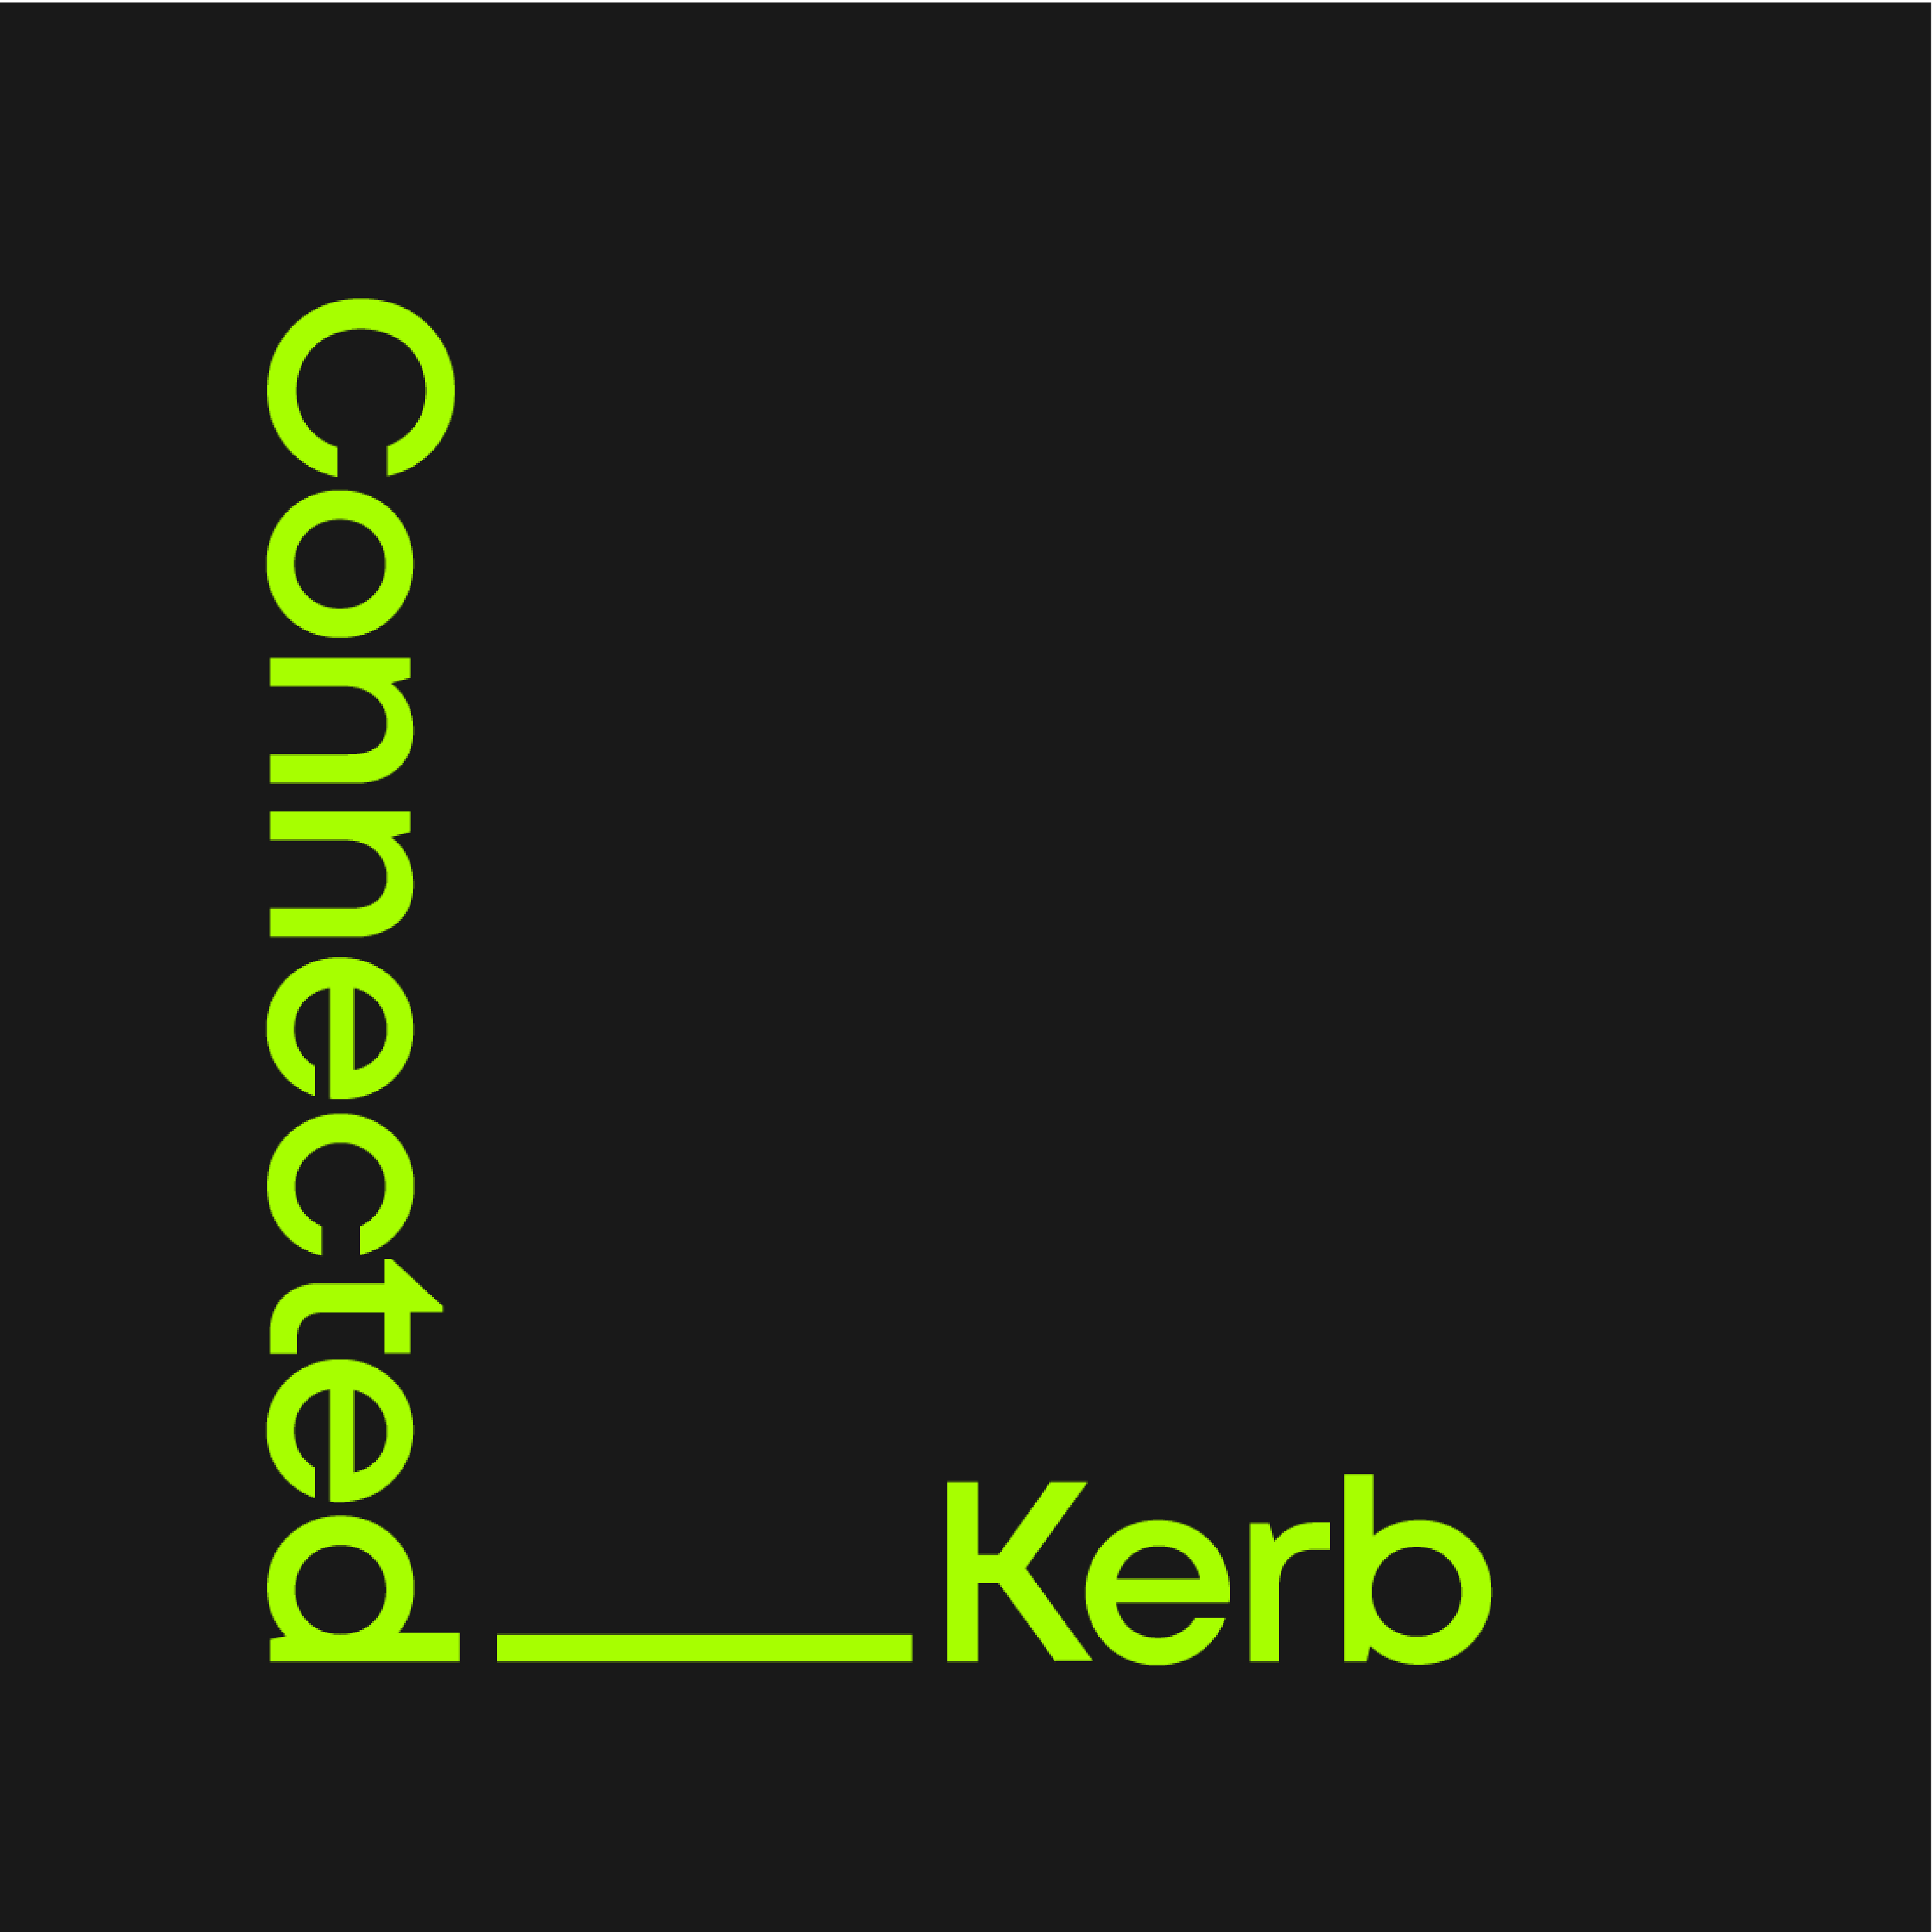 Connected Kerb Charging Stations Logo